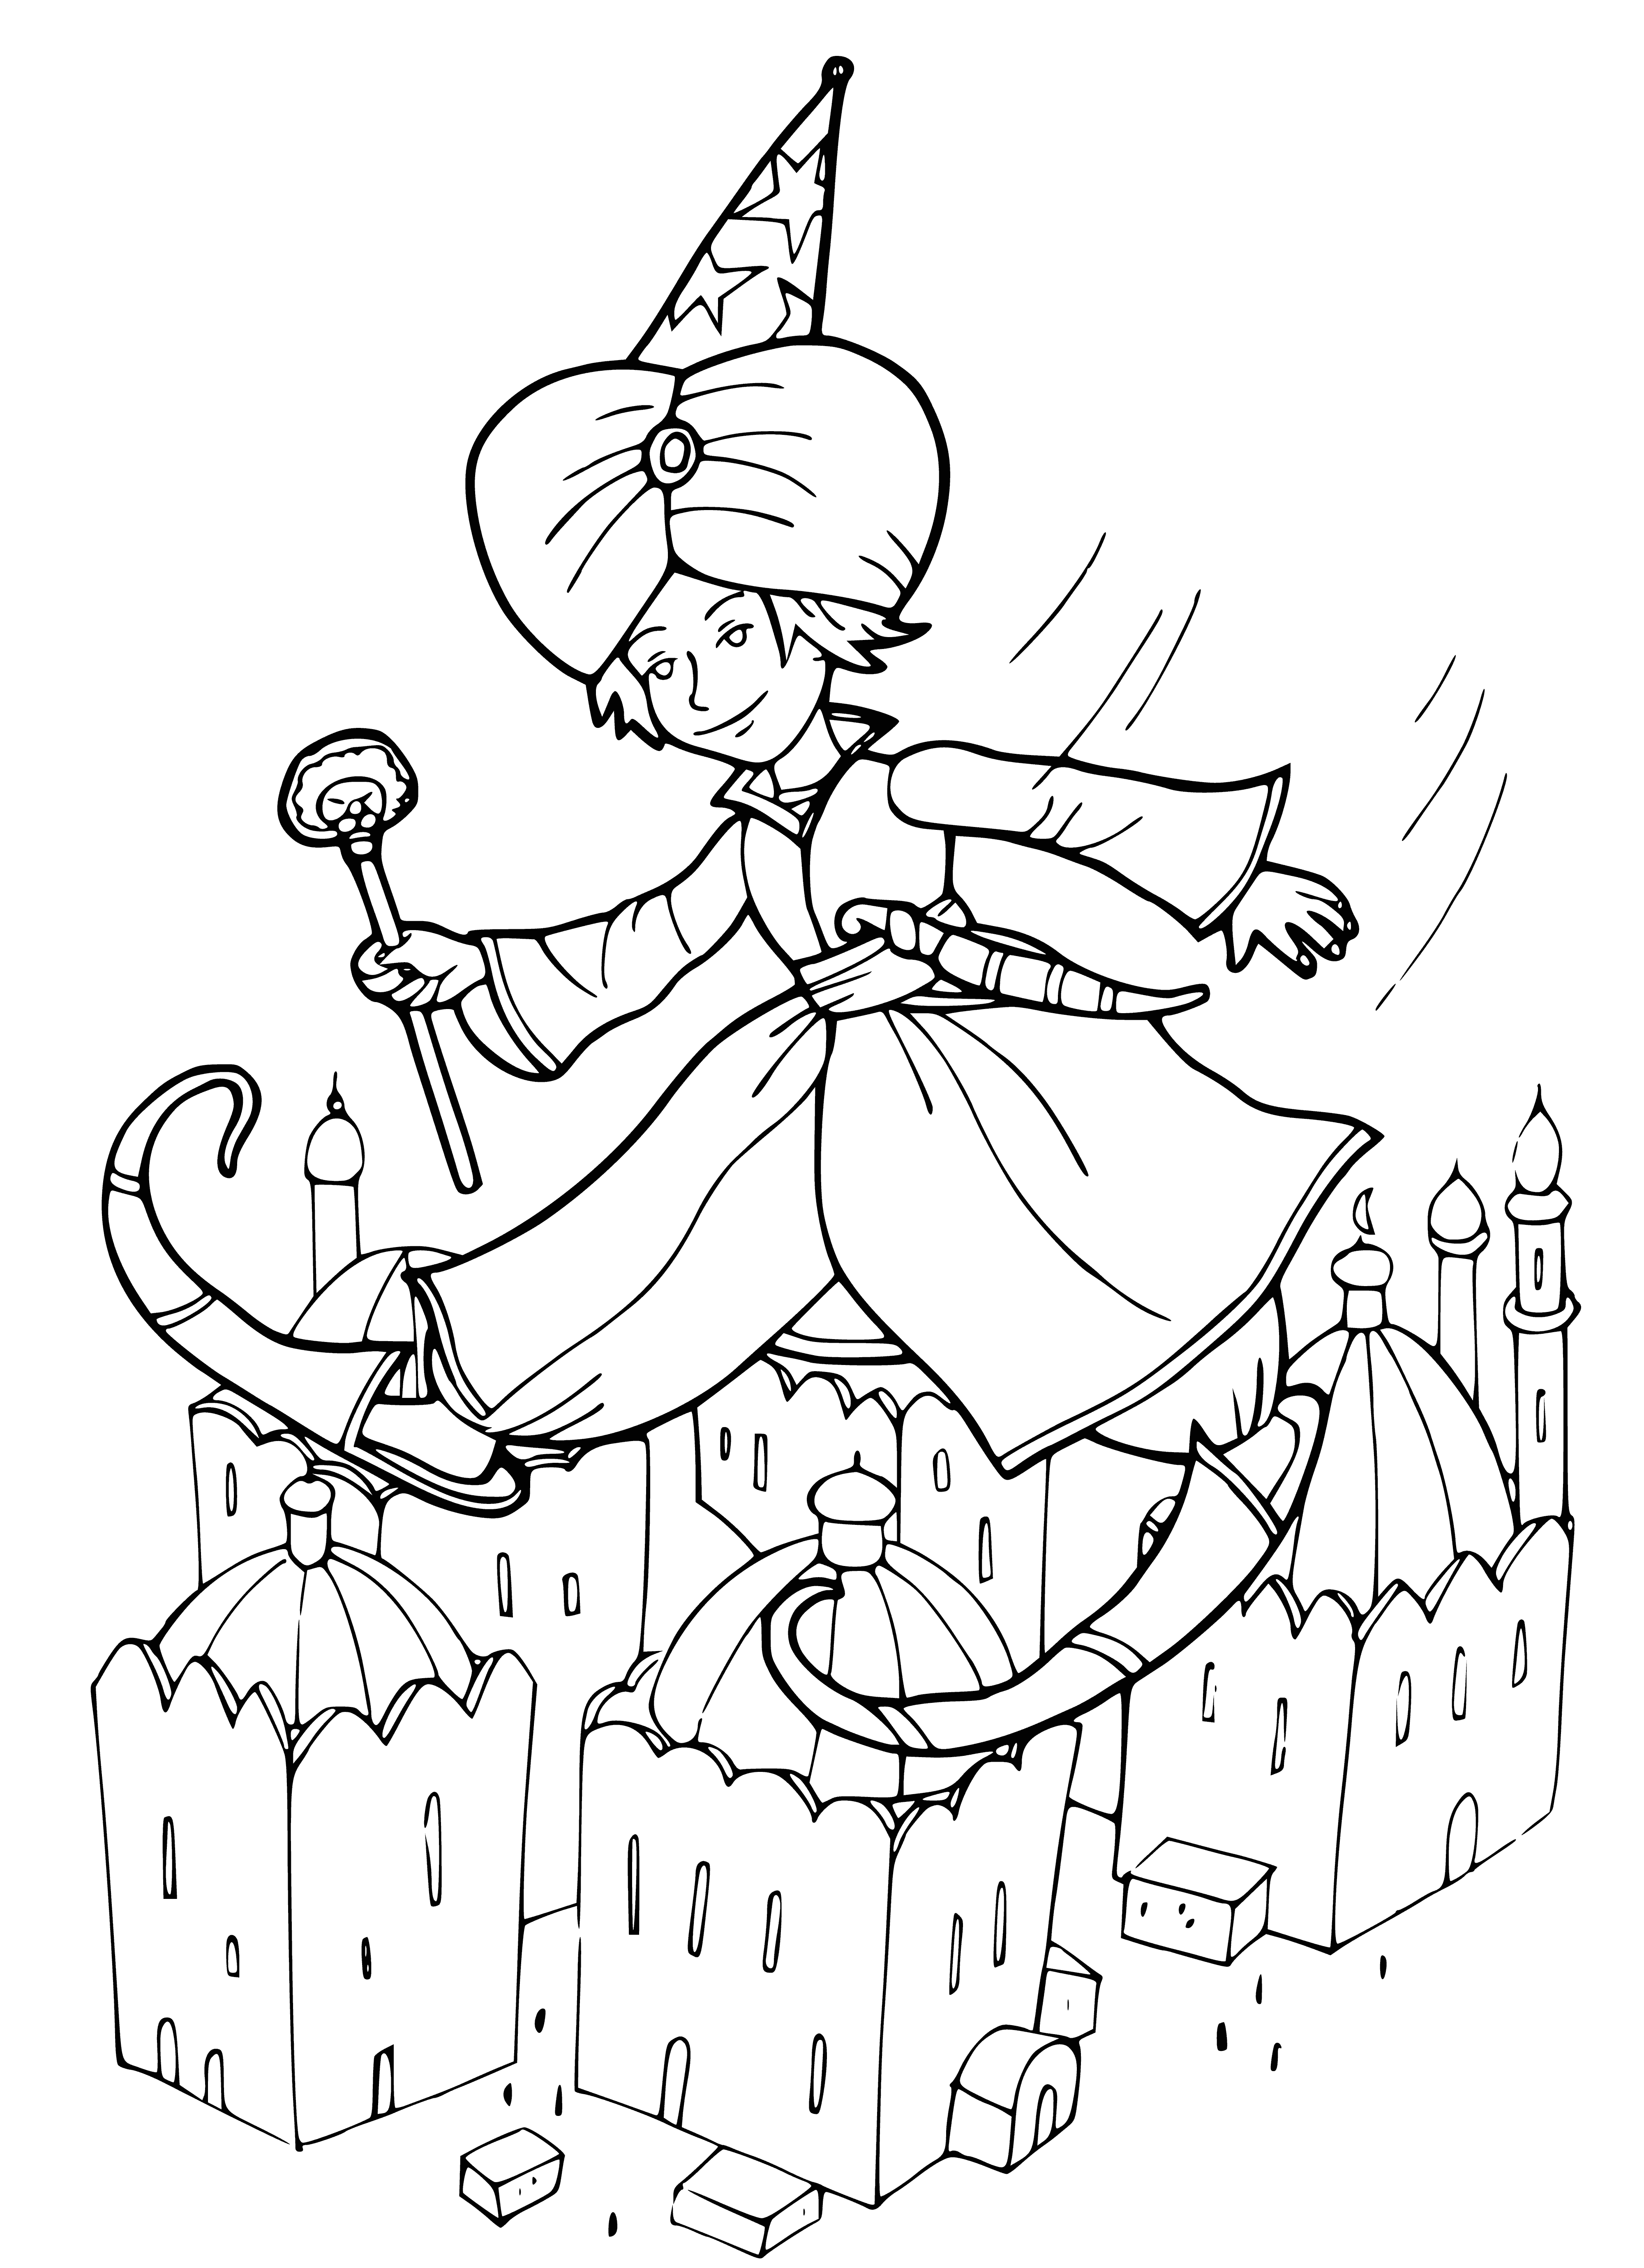 Mook the runner coloring page